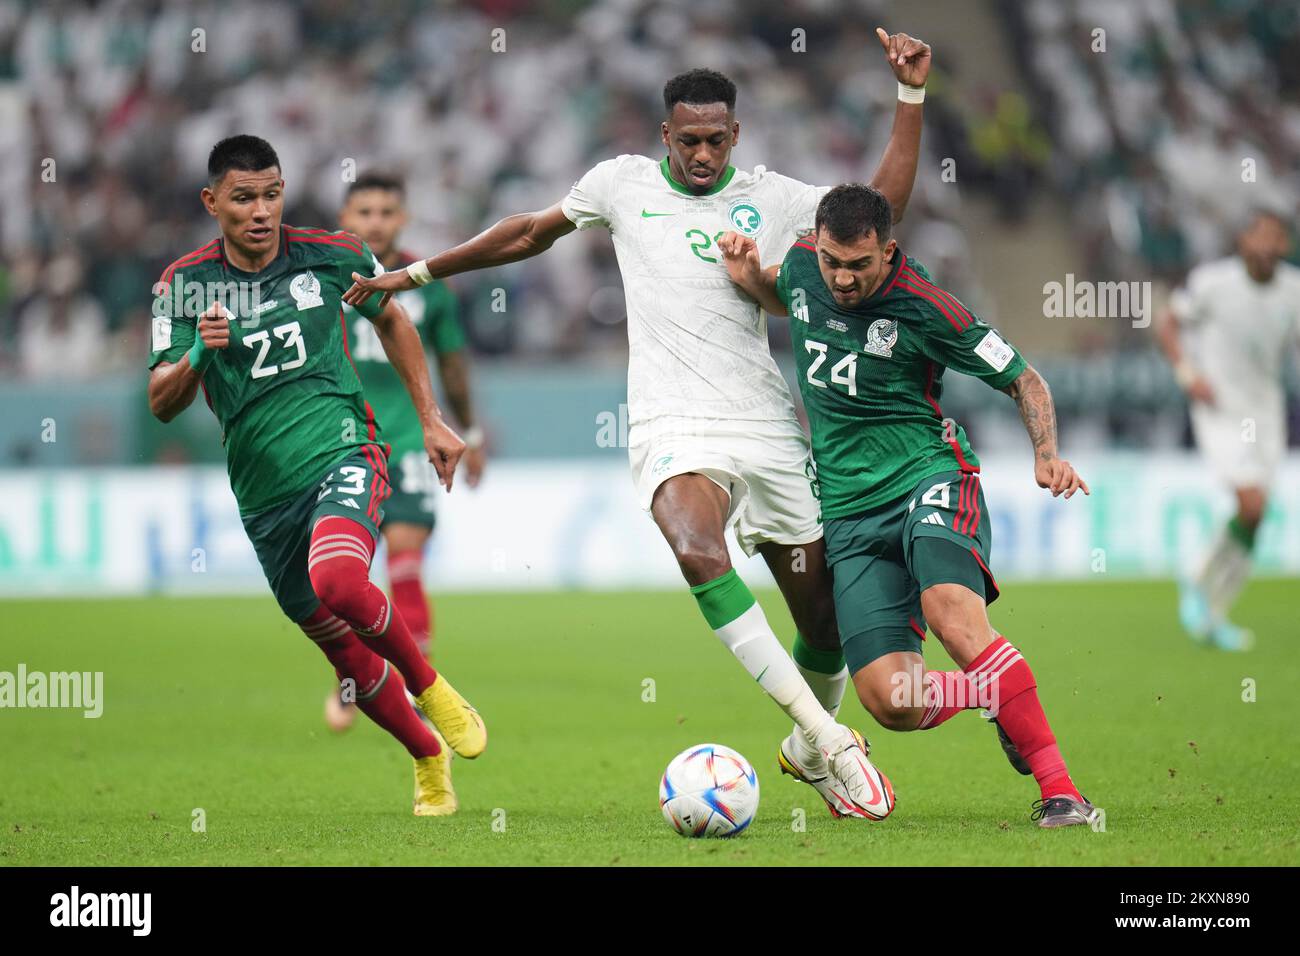 Lusail, Qatar. 30th Nov, 2022. Mohamed Kanno (2nd R) of Saudi Arabia vies with Luis Chavez (1st R) of Mexico during the Group C match between Saudi Arabia and Mexico at the 2022 FIFA World Cup at Lusail Stadium in Lusail, Qatar, Nov. 30, 2022. Credit: Meng Dingbo/Xinhua/Alamy Live News Stock Photo